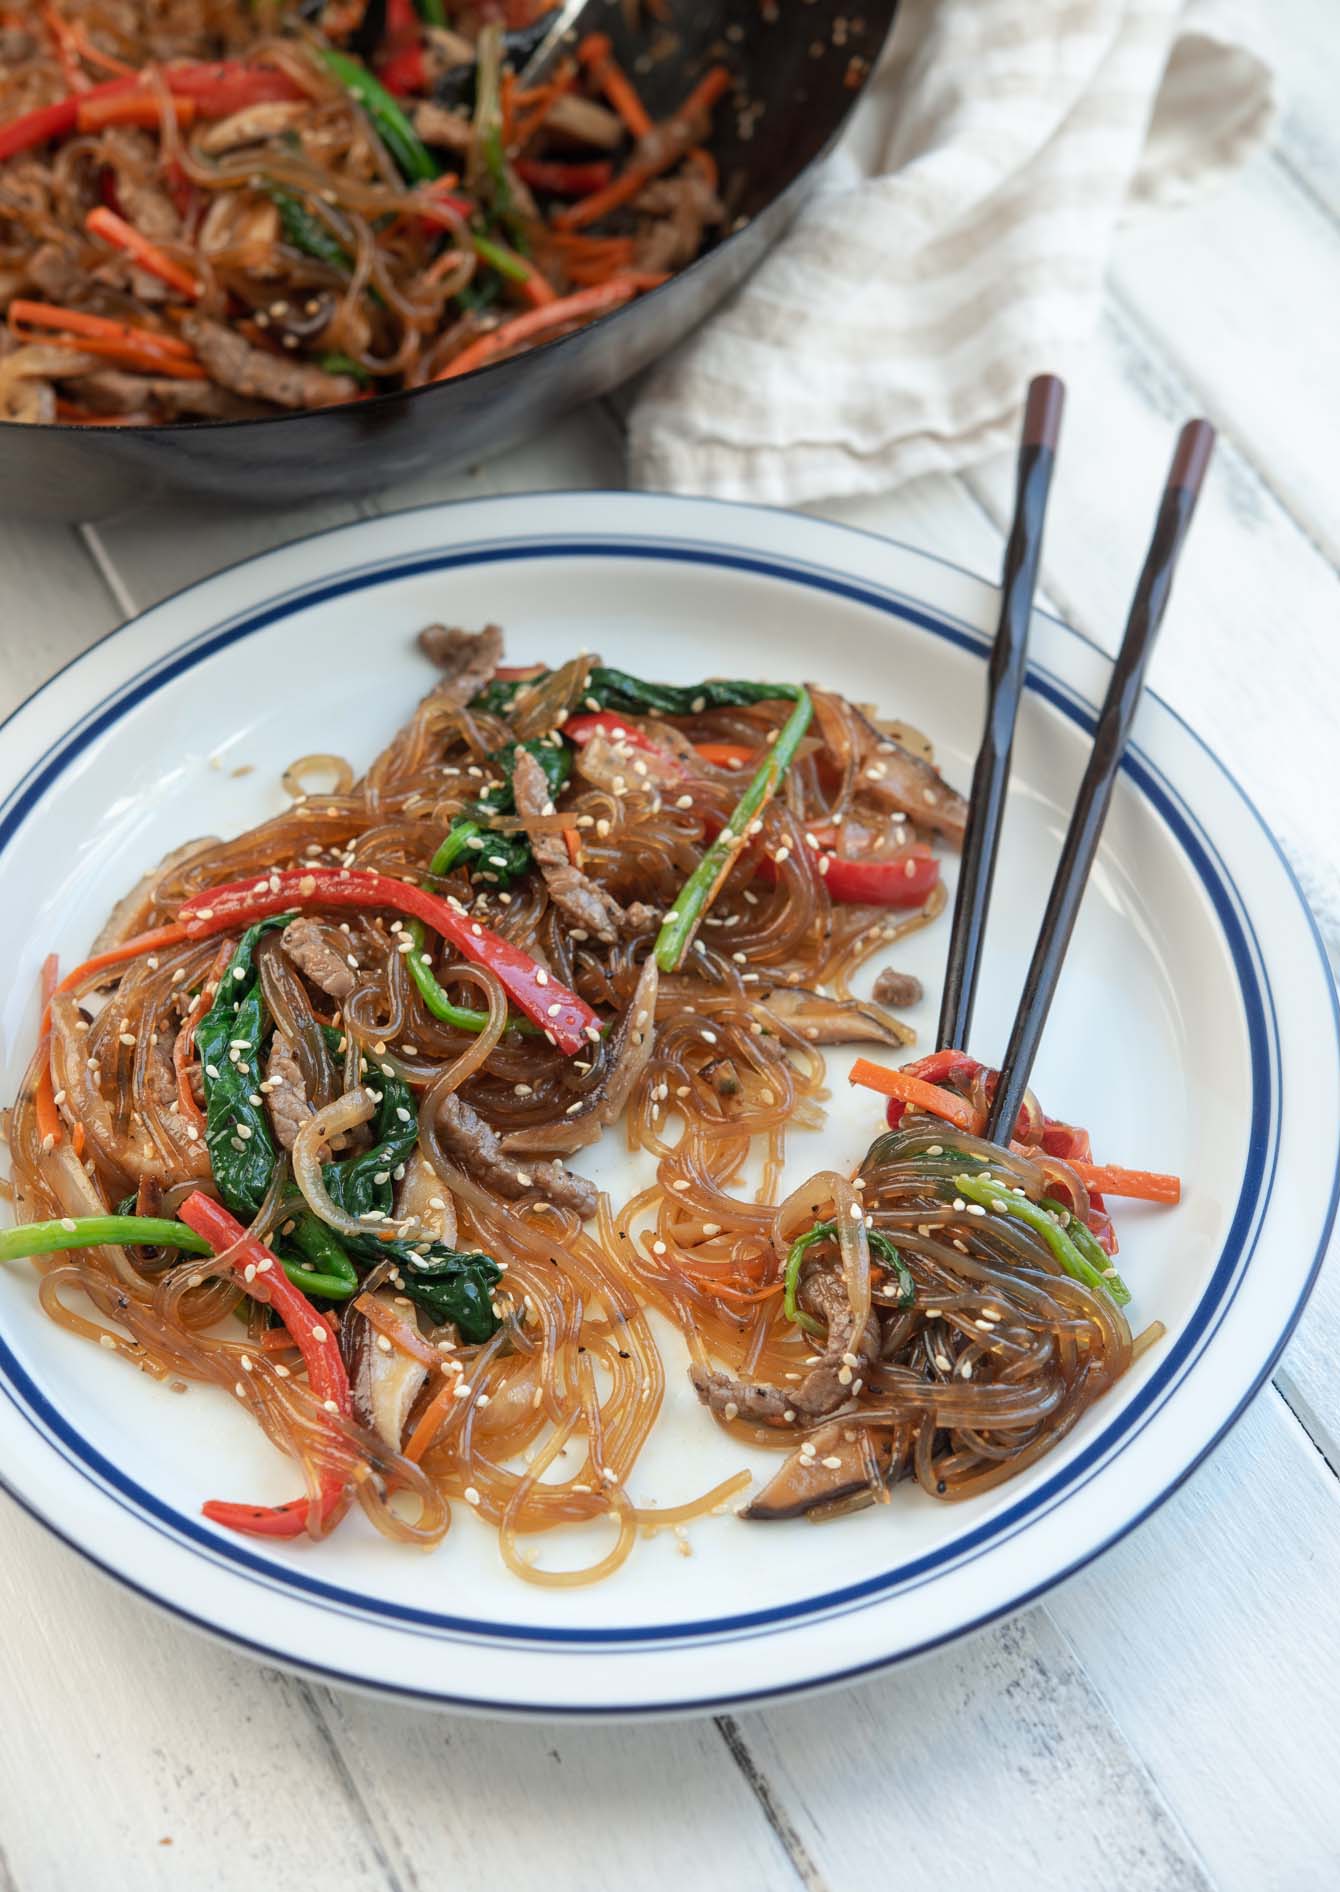 A plate of japchae, Korean  glass noodles with vegetables and beef.